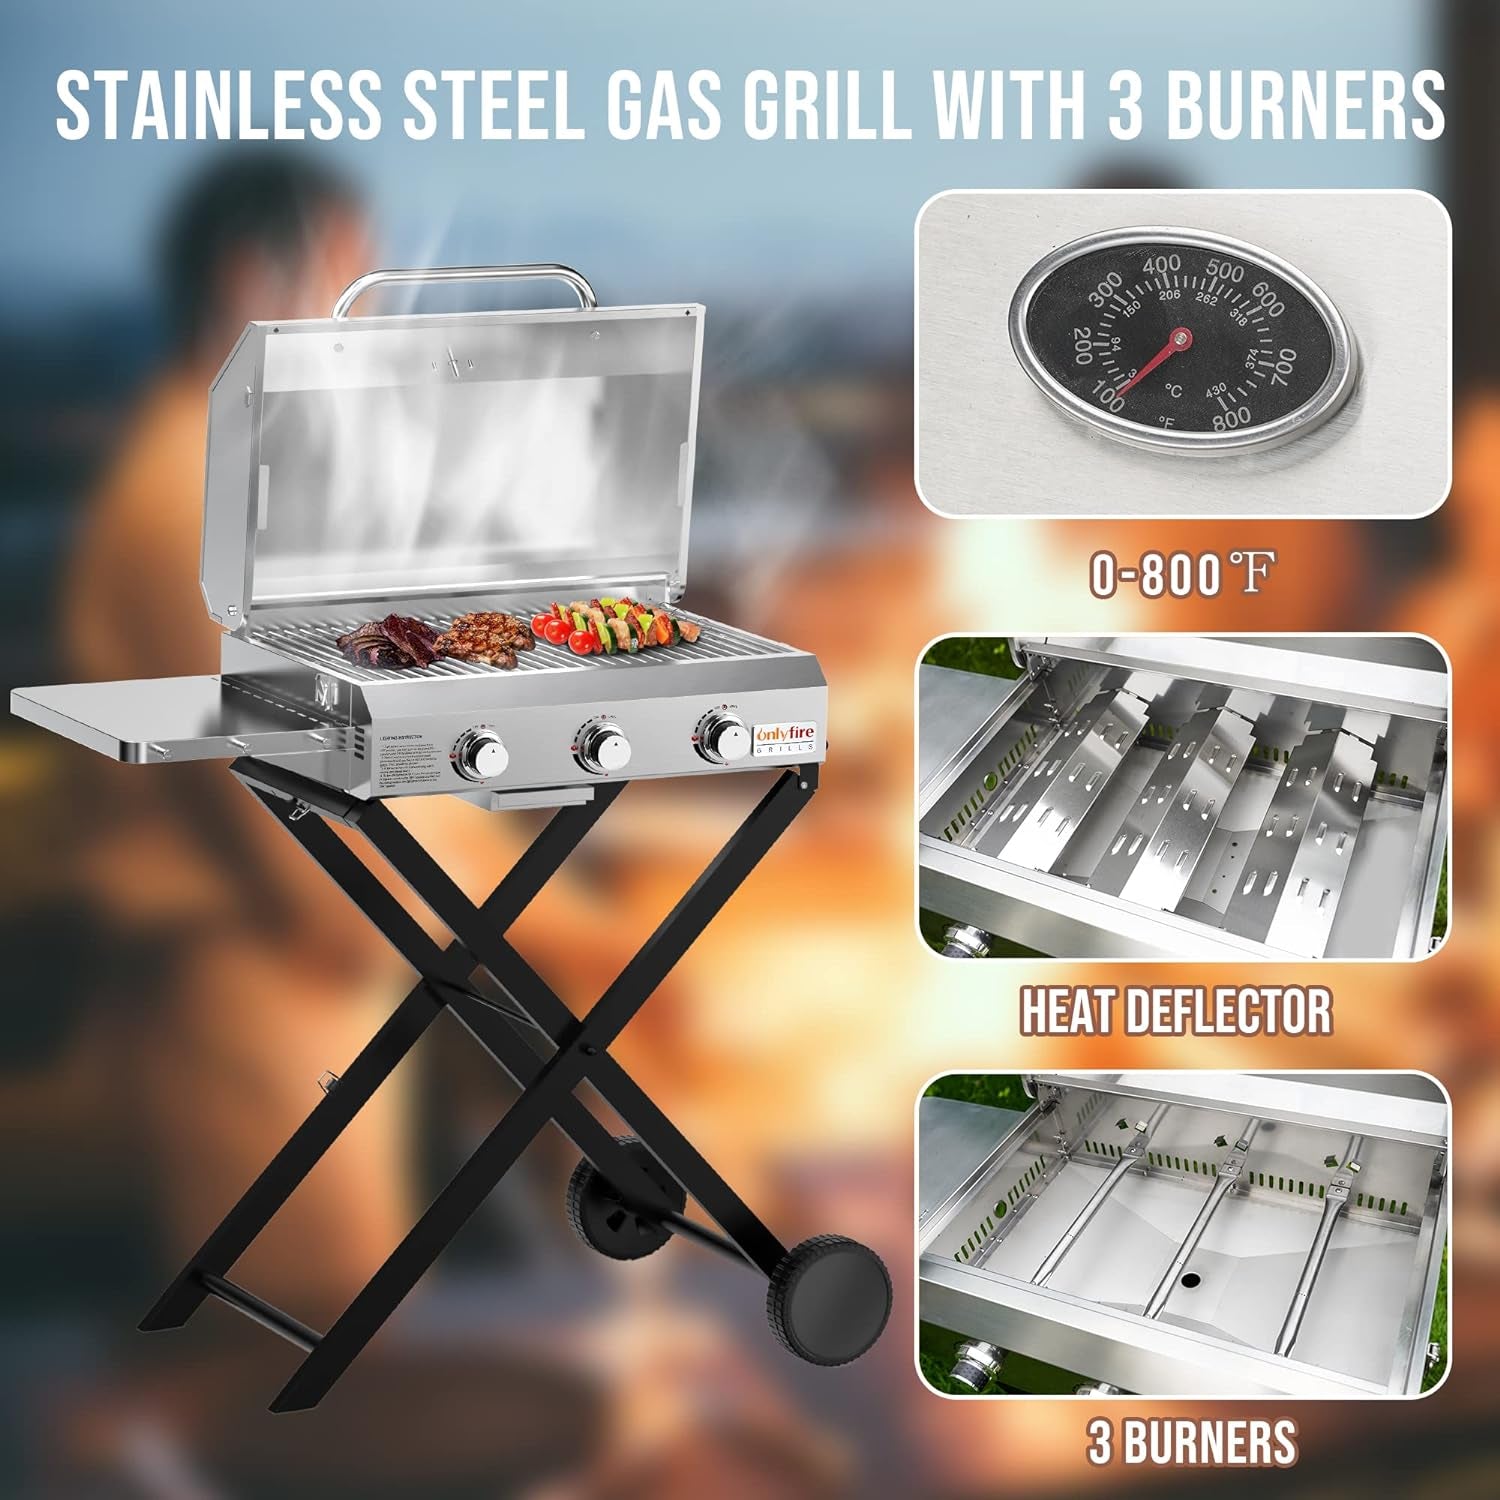 Onlyfire BBQ Gas Grill 3-Burner with Foldable Cart & Side Table, Portable Propane Grill with Lid for Outdoor Patio Backyard Barbecue Camping Tailgating RV Trip, Stainless Steel, GS308